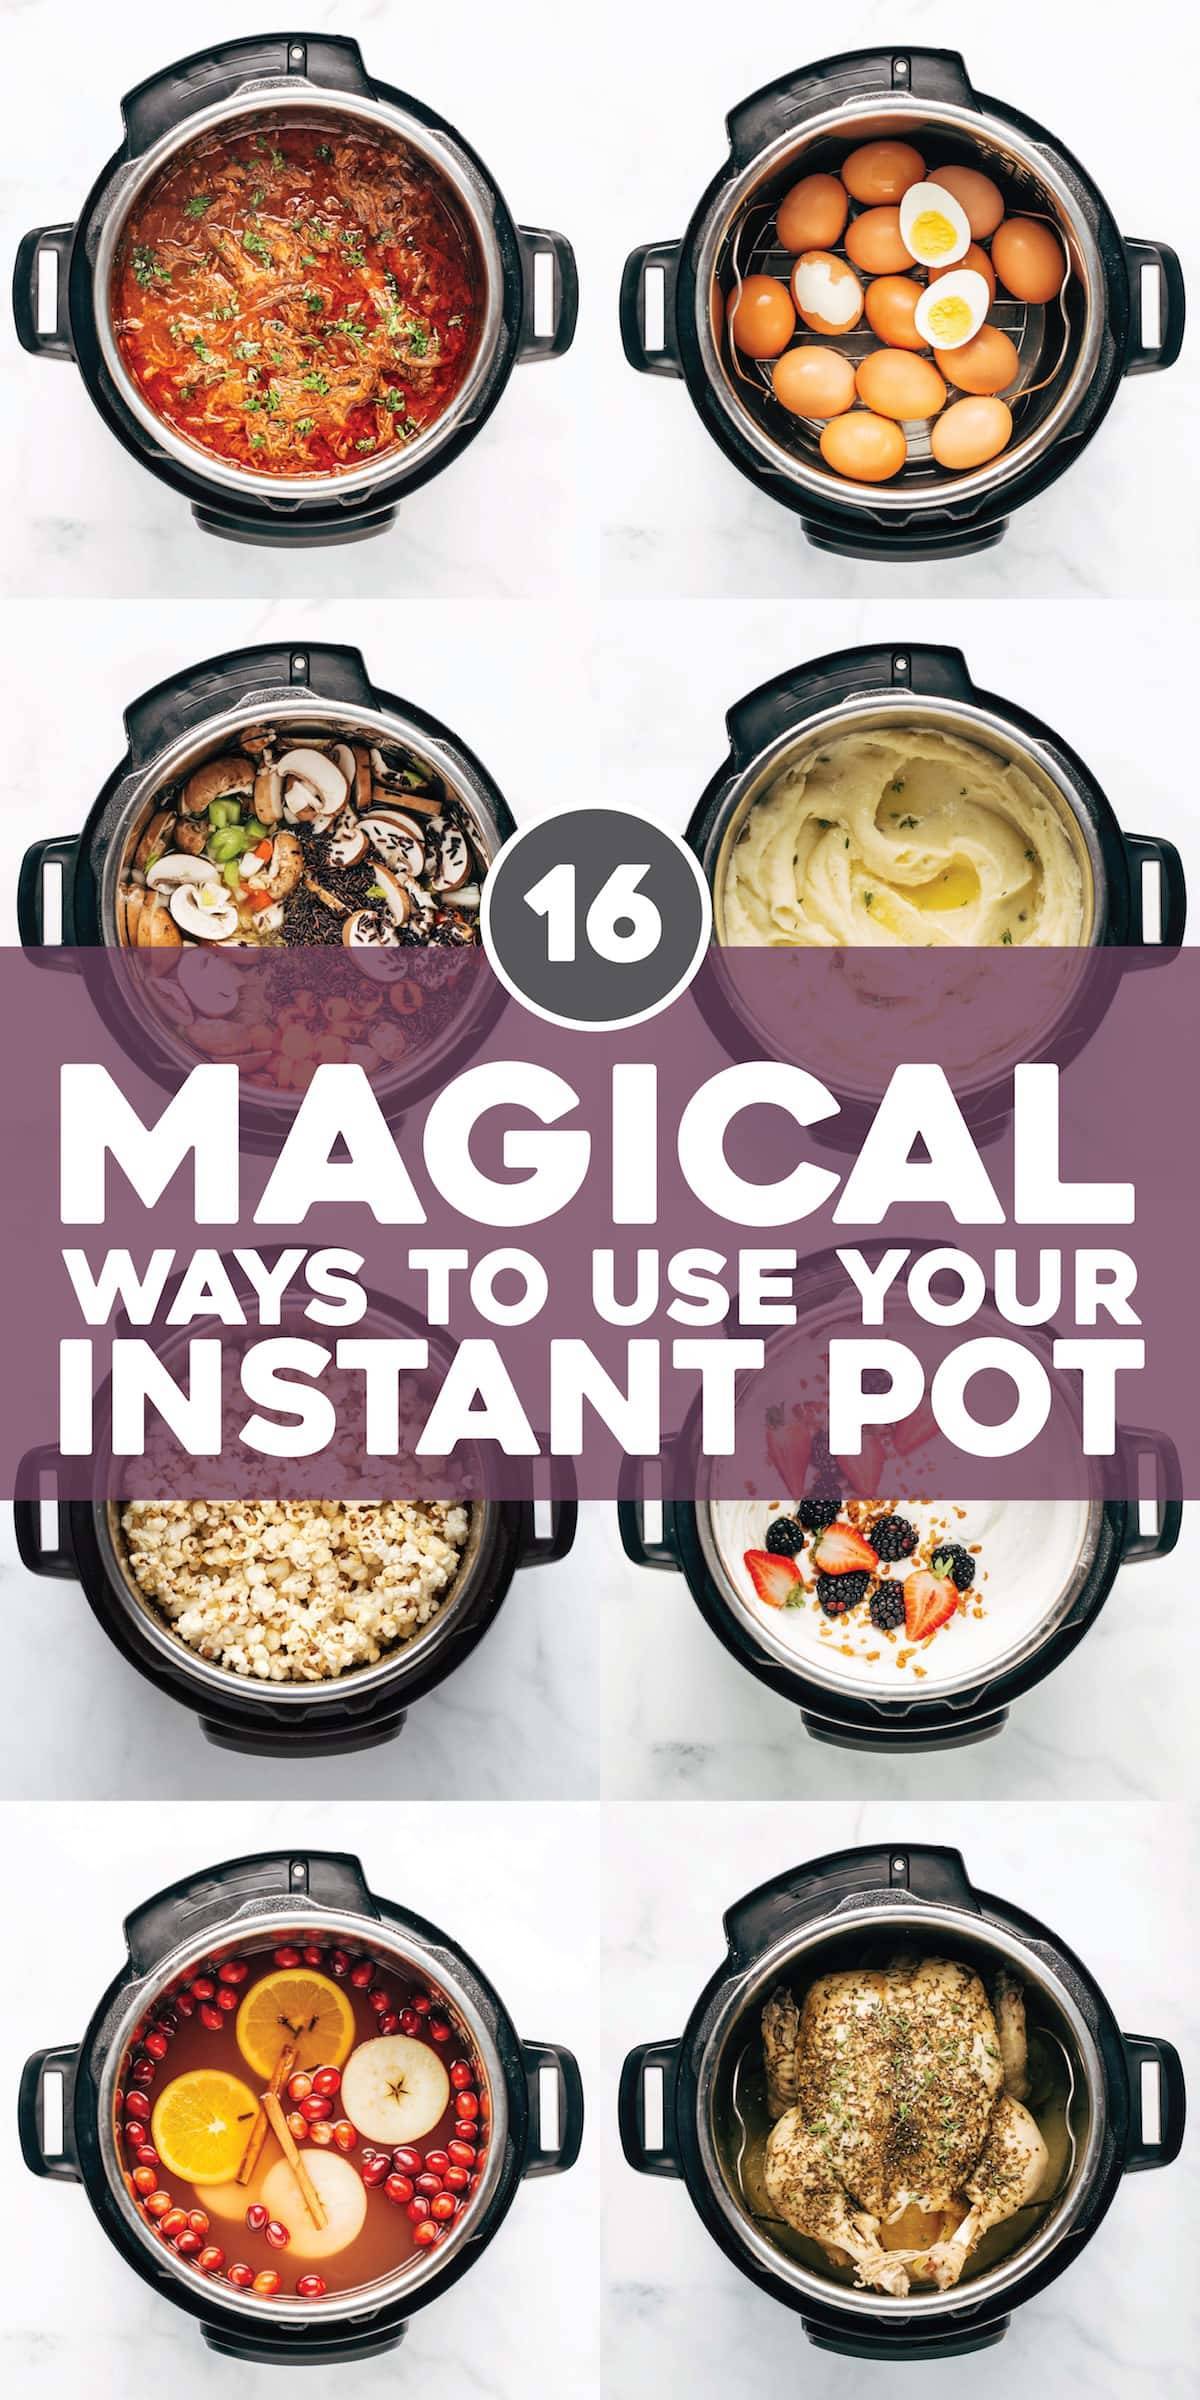 16 Magical Ways to Use Your Instant Pot.